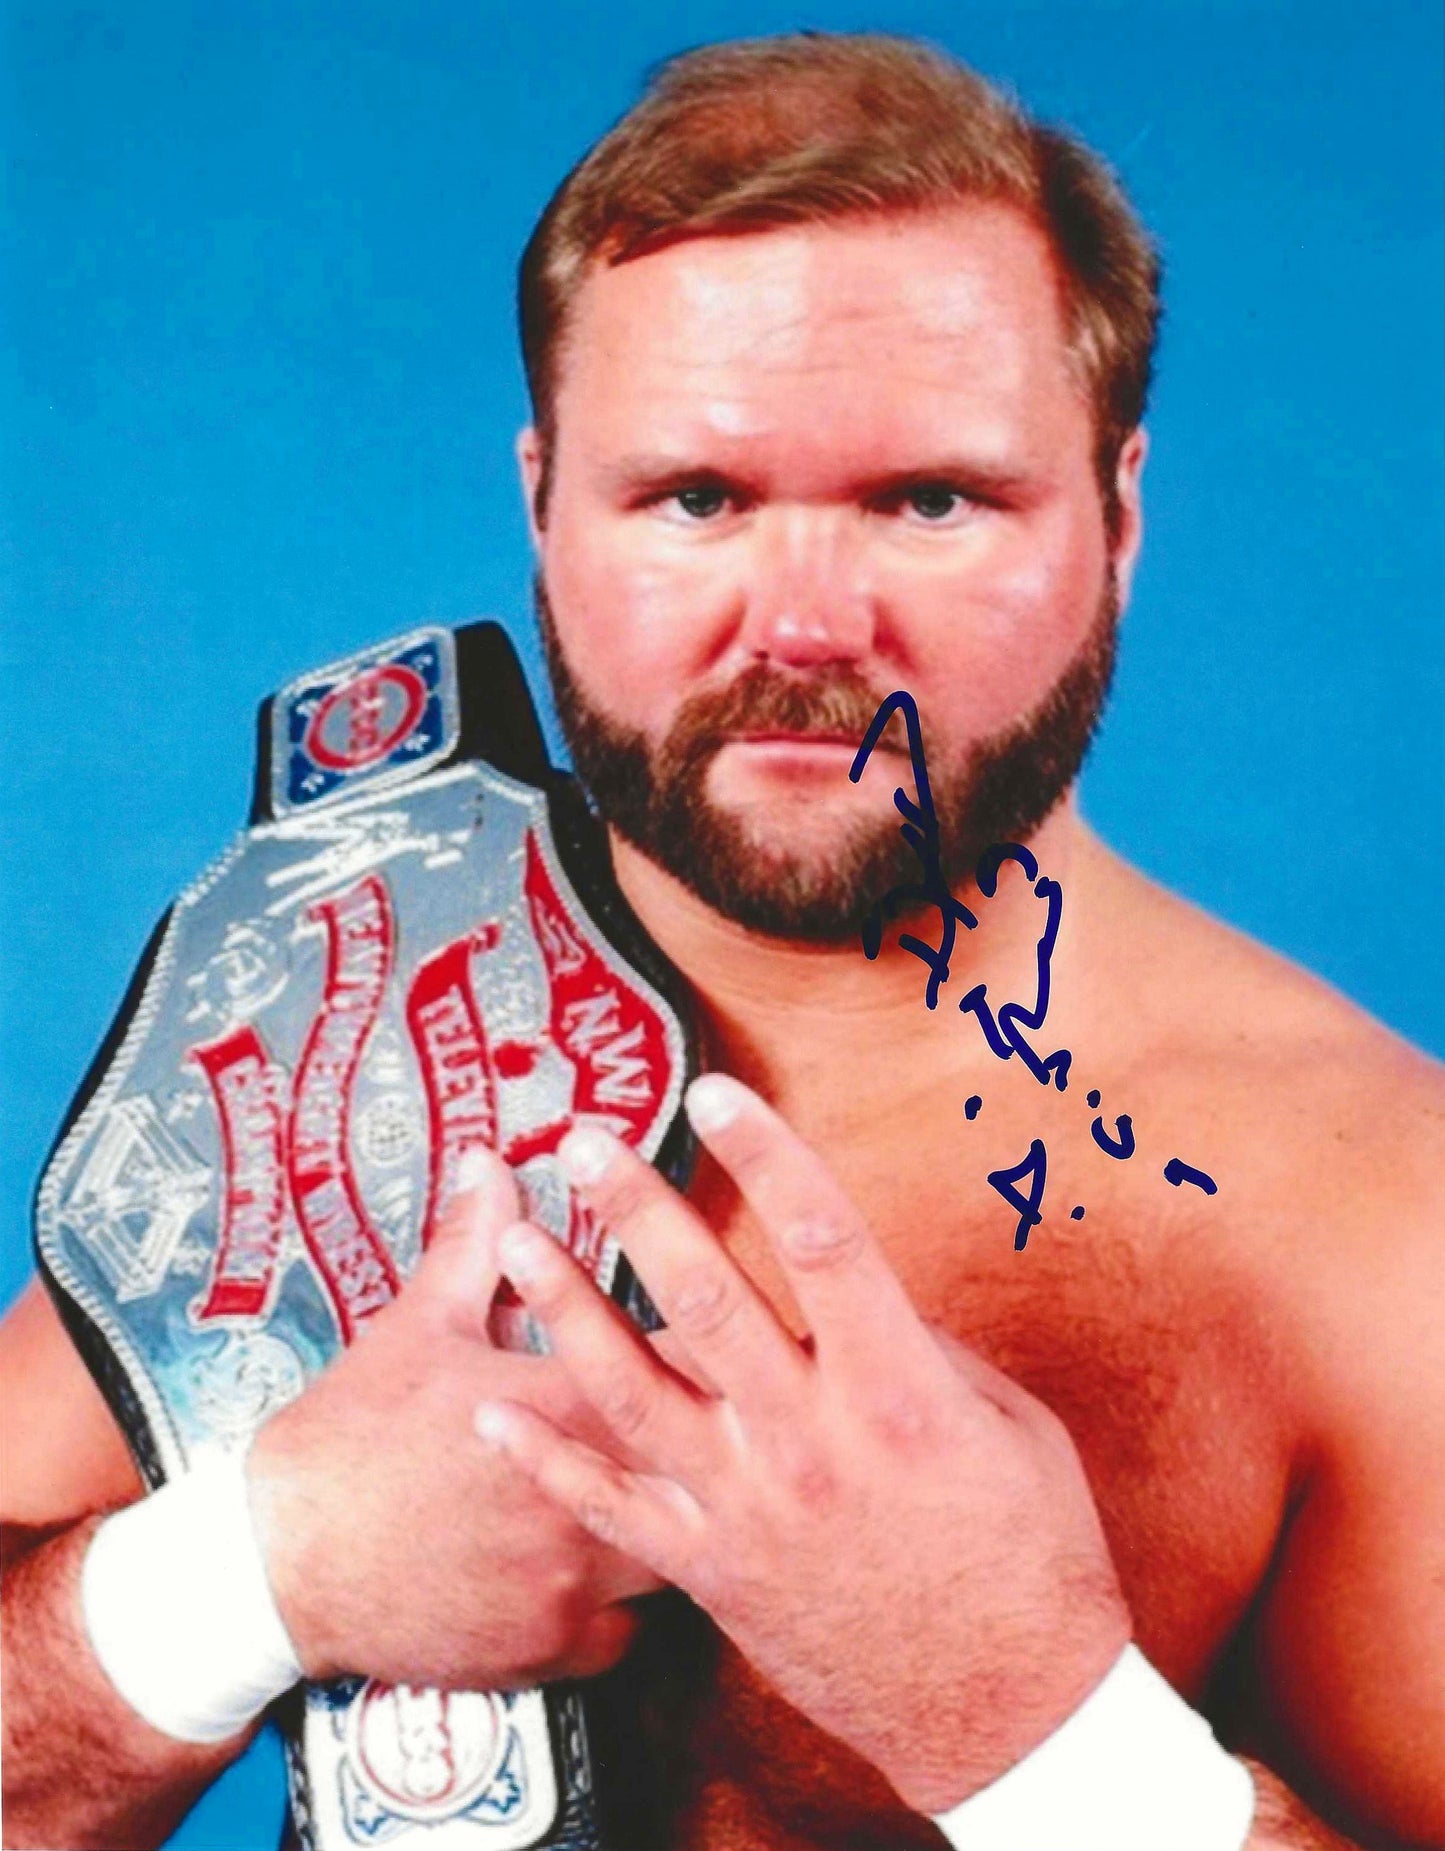 Arn Anderson Autographed Signed "WWE WCW" 8X10 Photo Elite Promotions & Graphz Authentication